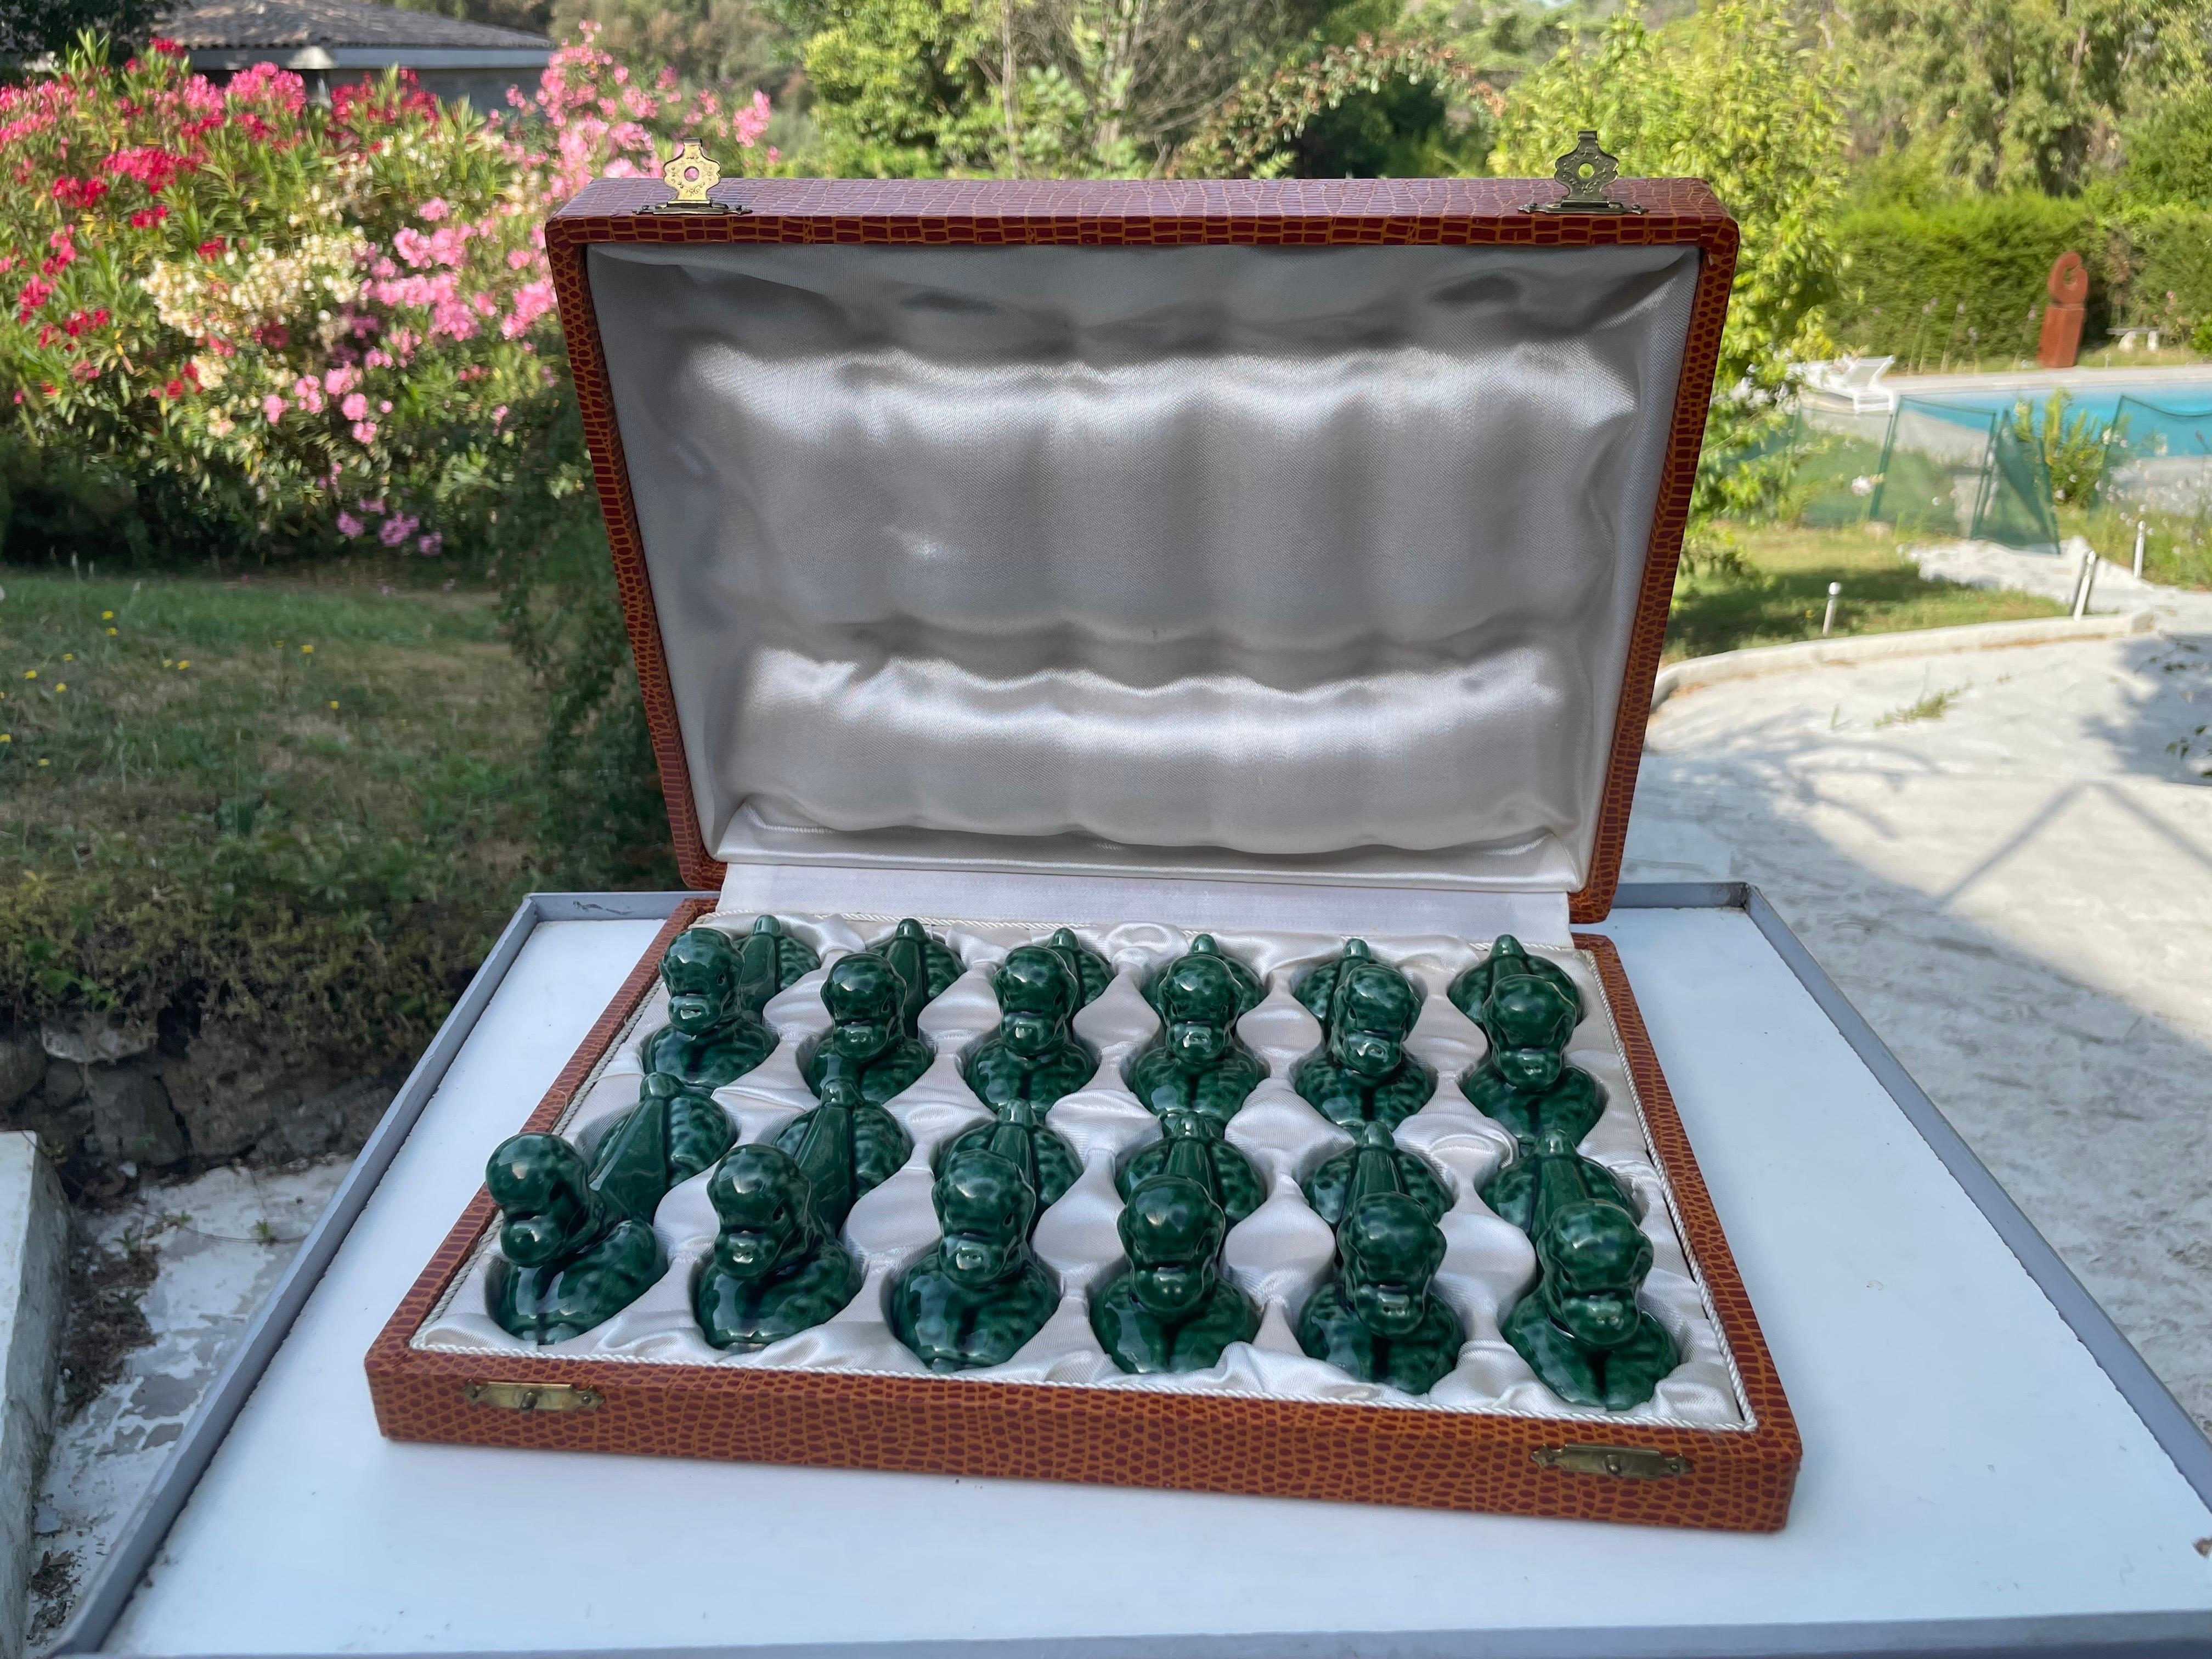 We have a beautiful ceramic knife holder box, green in color, made in France in the 1970s.
The knife rests are in perfect condition, and the box is in a very nice padded TEXTURE.